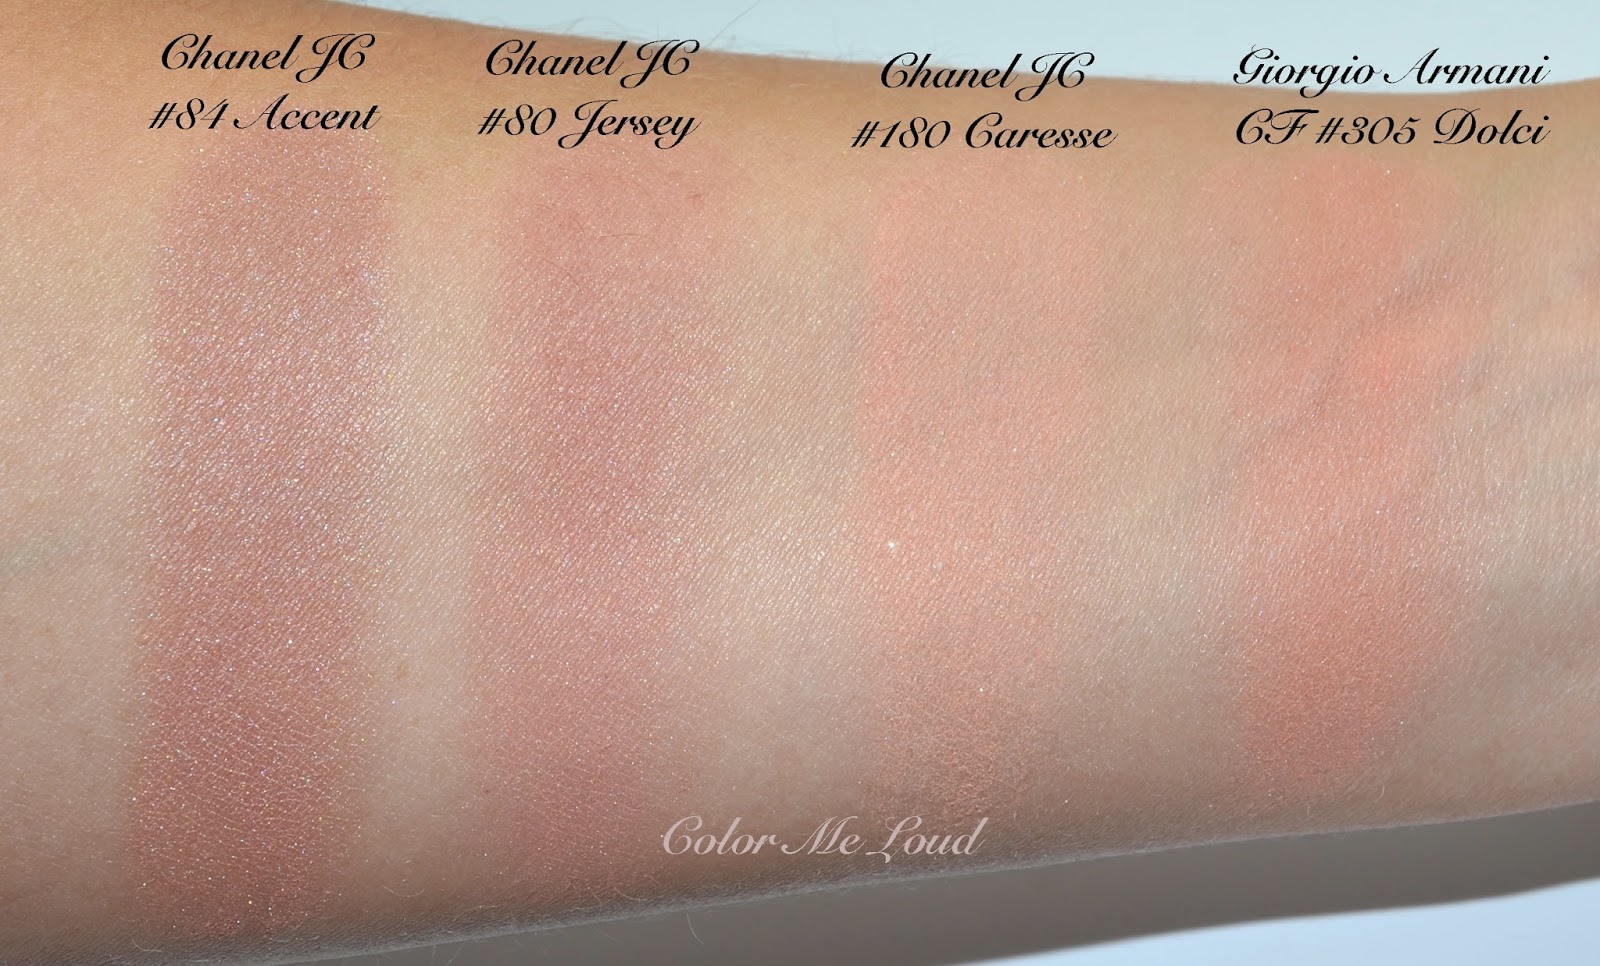 Chanel Jersey (80) Joues Contraste Blush Review & Swatches